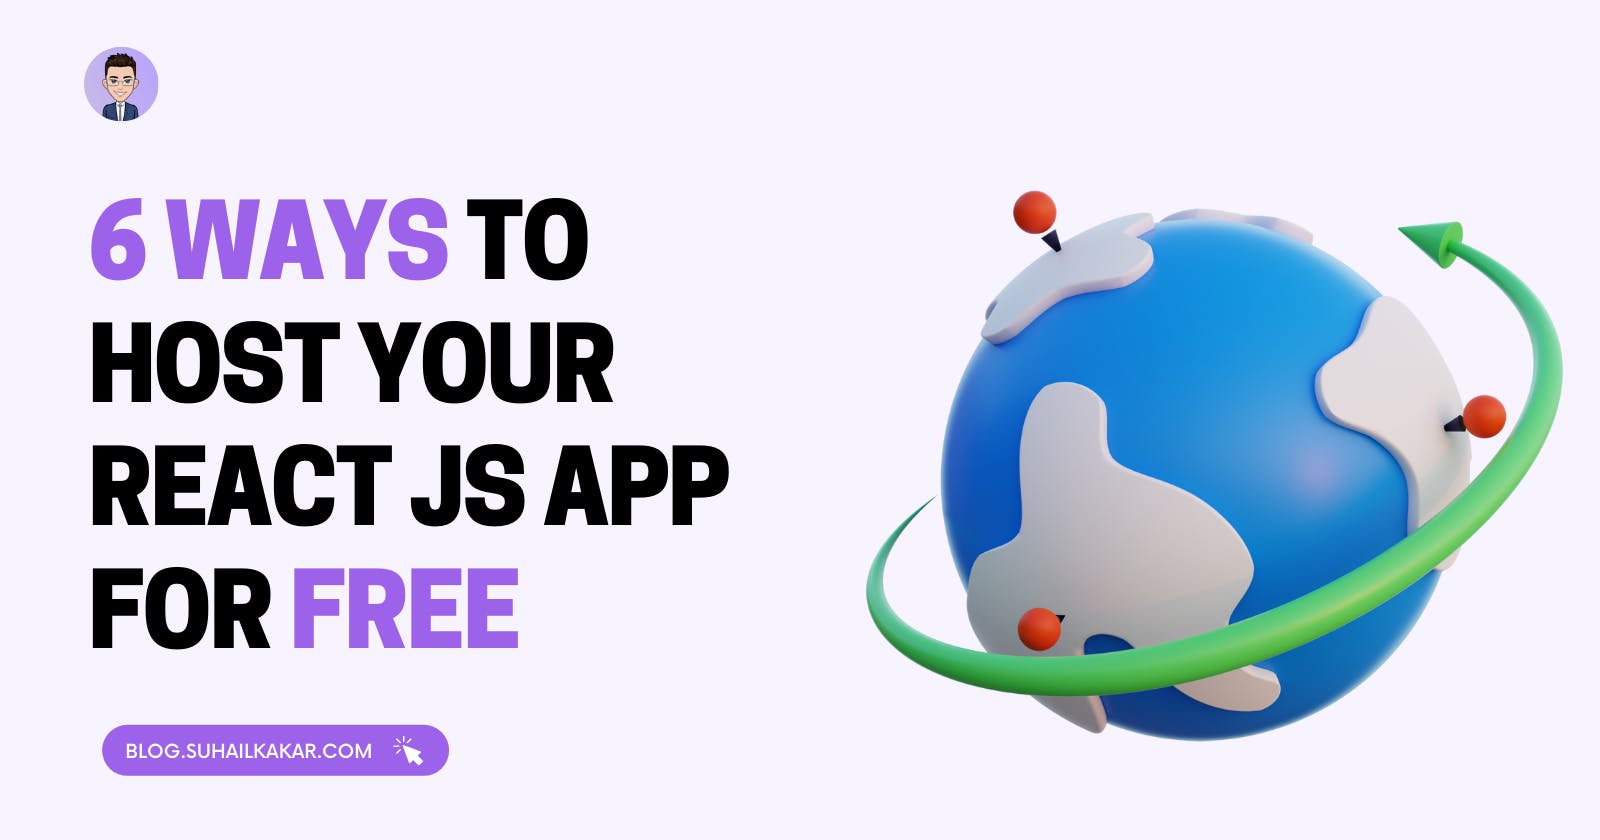 6 Ways to Host Your React JS App For Free